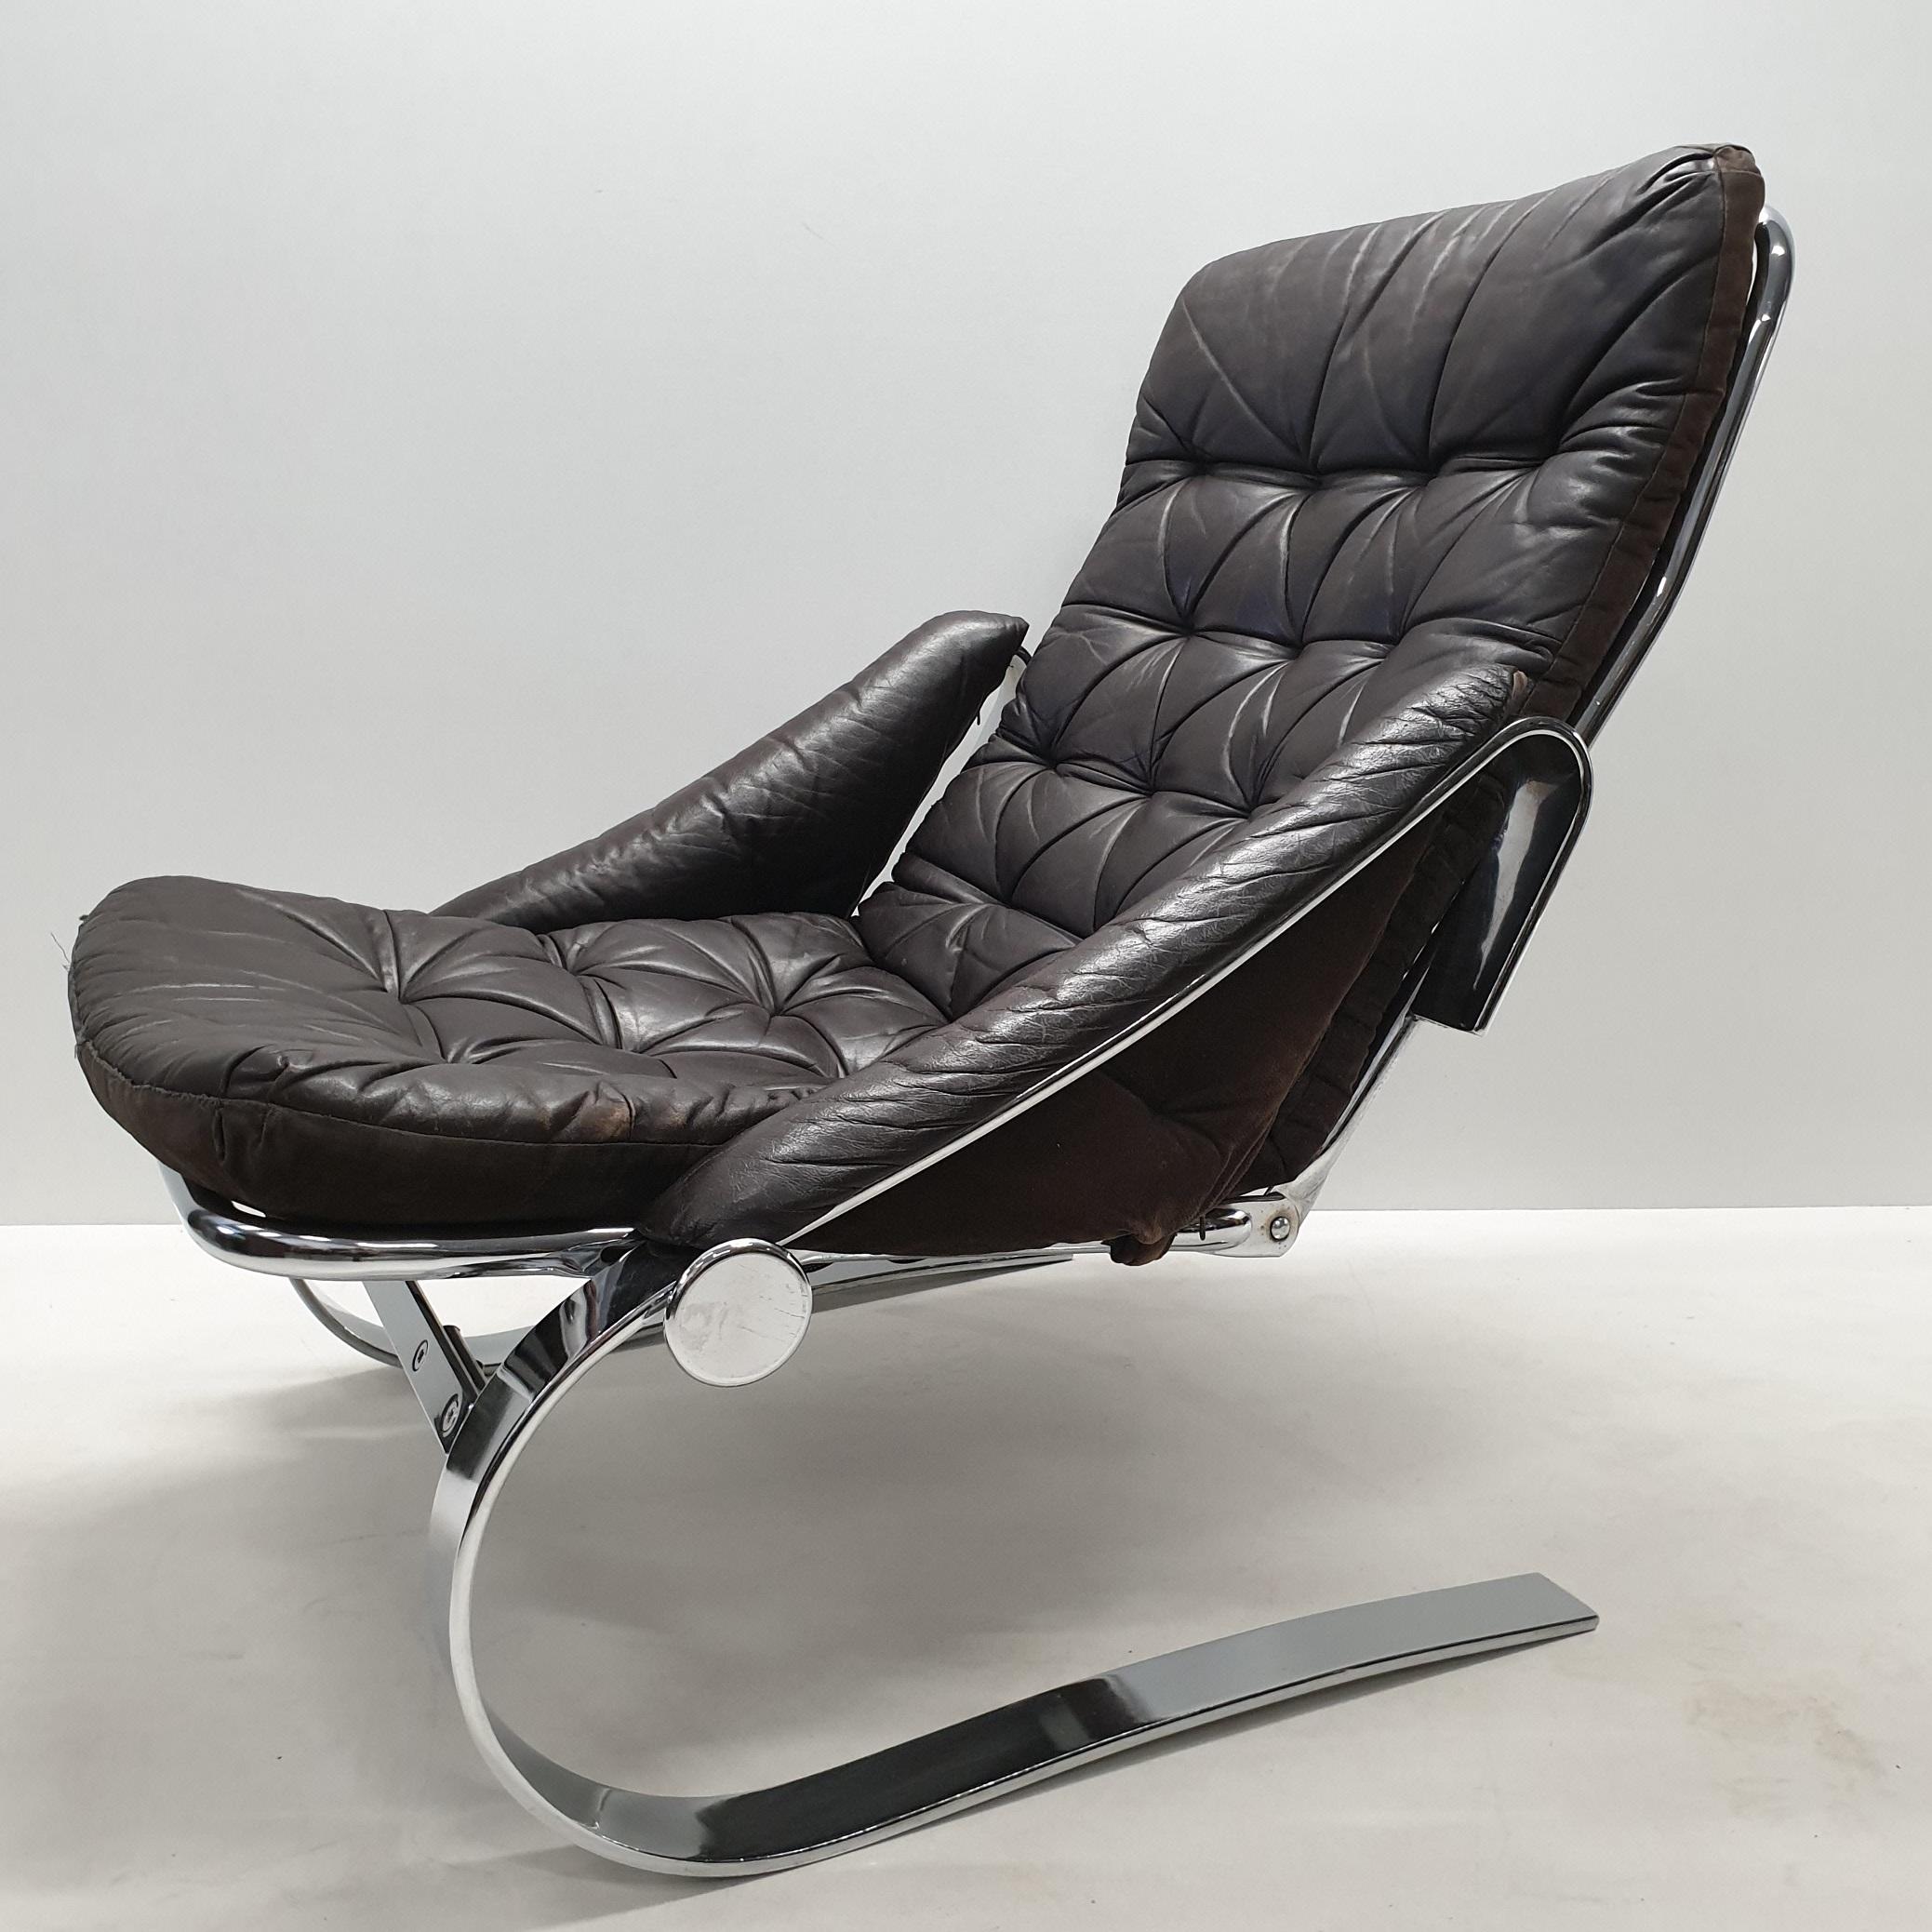 20th Century Scandinavian Chrome Flat Steel and Leather Lounge Chair, 1970s For Sale